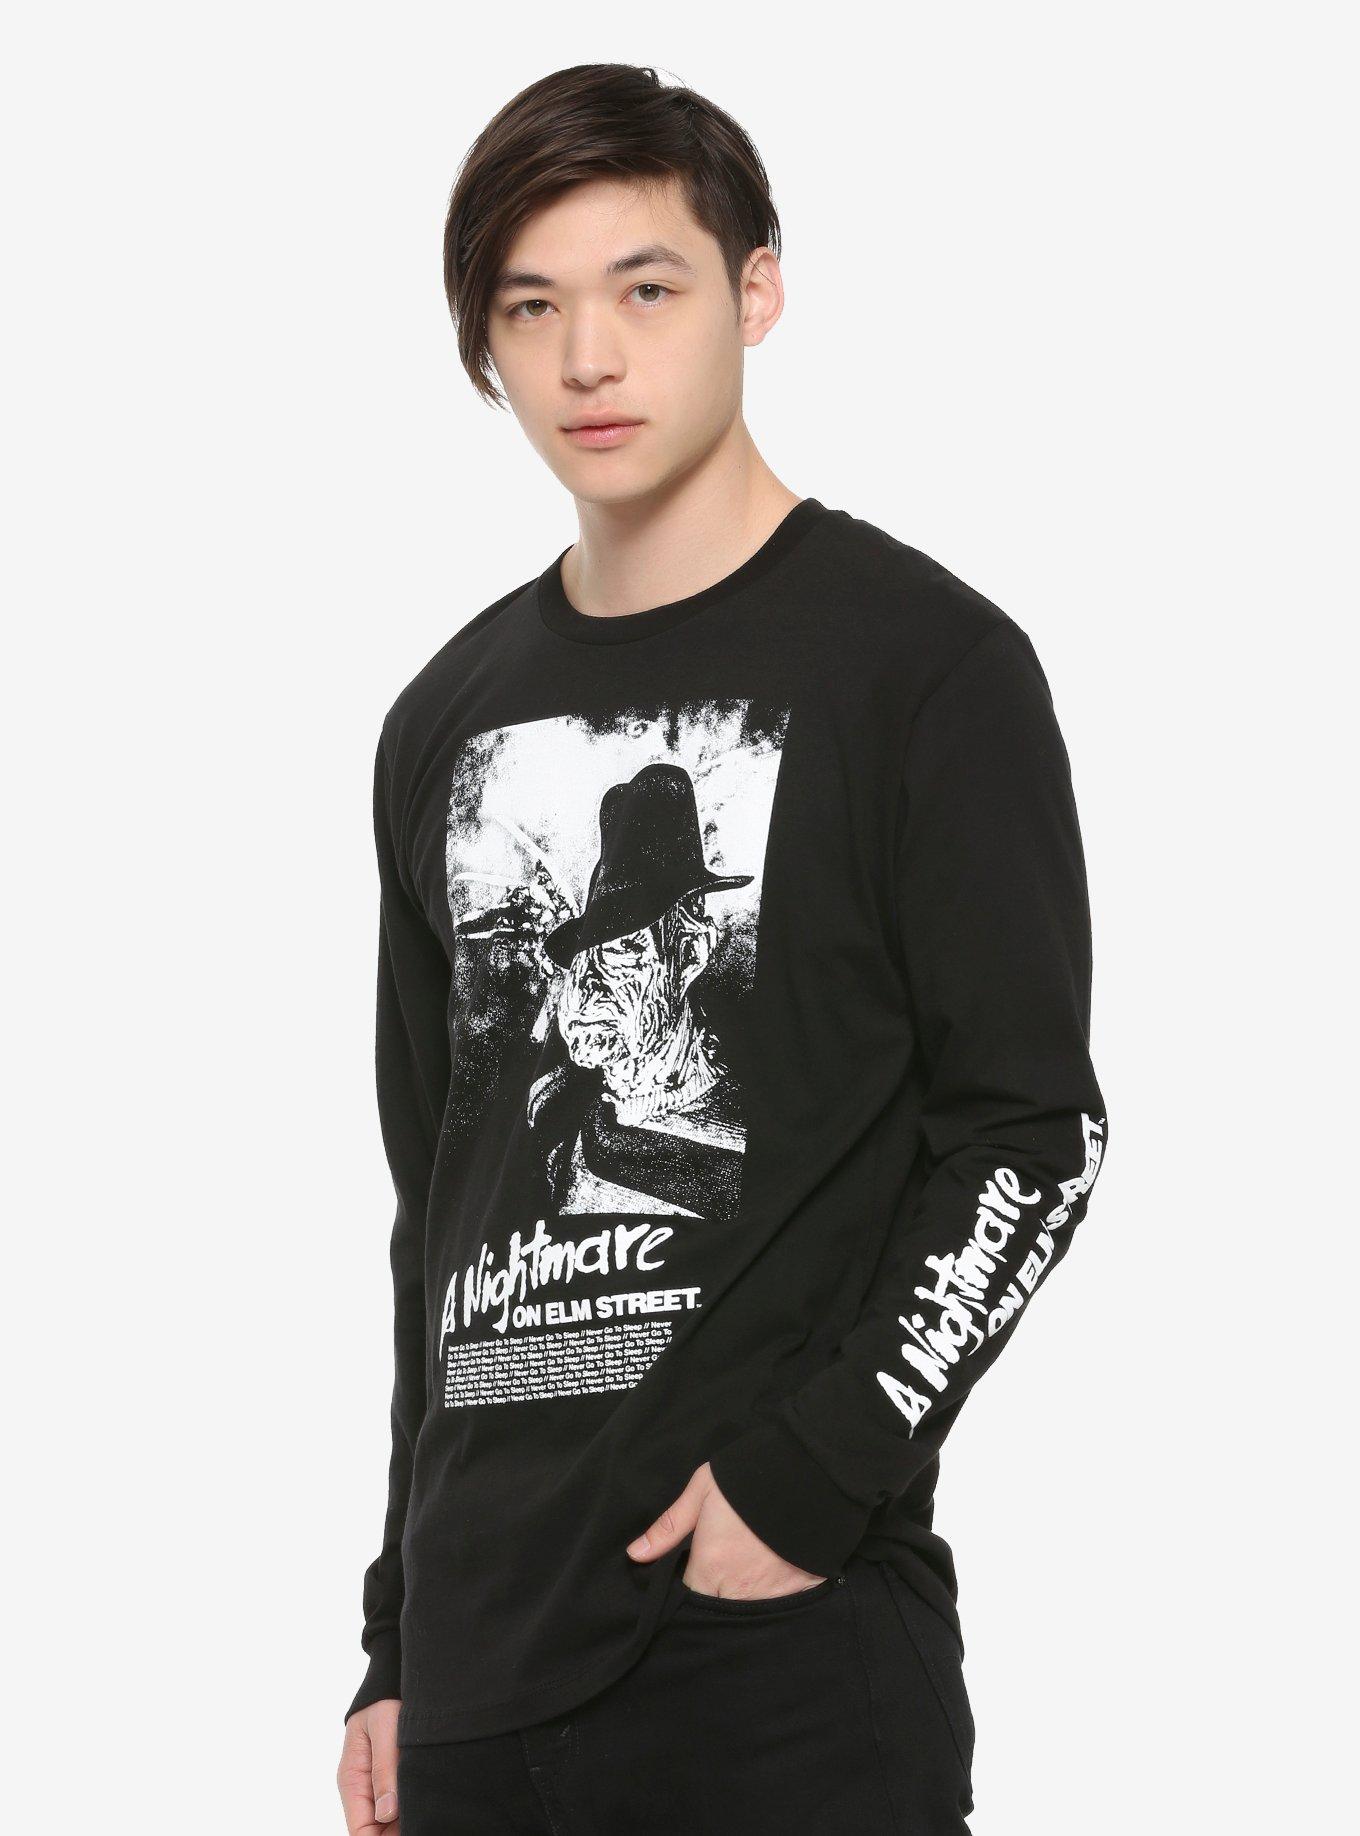 A Nightmare On Elm Street Black & White Freddy Long-Sleeve T-Shirt Hot Topic Exclusive, BLACK, hi-res